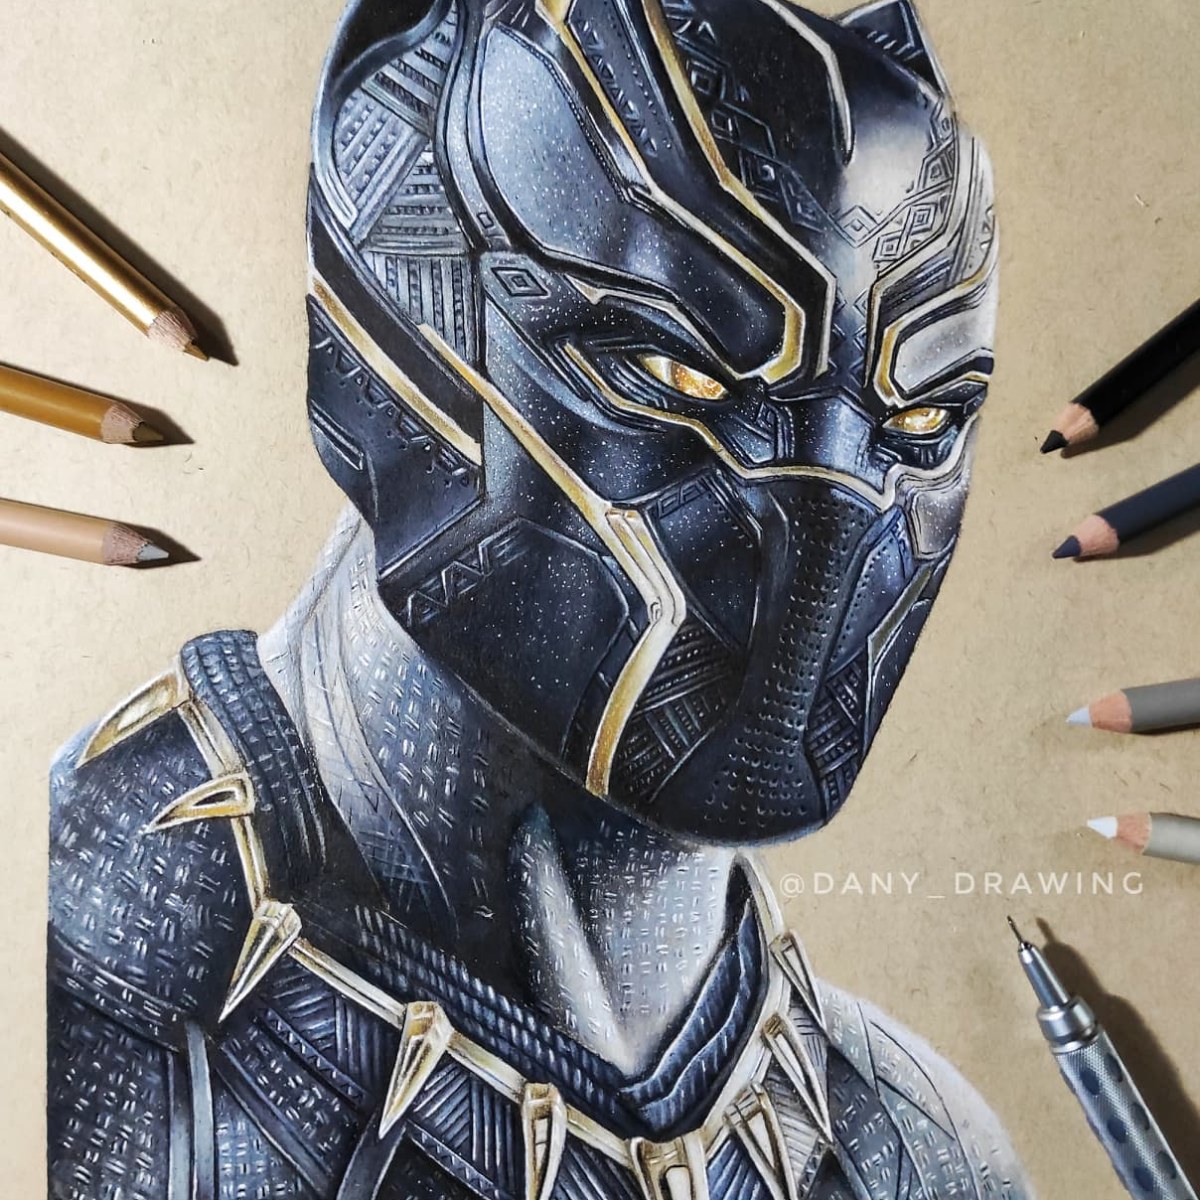 Black and white Black Panther pencil drawing